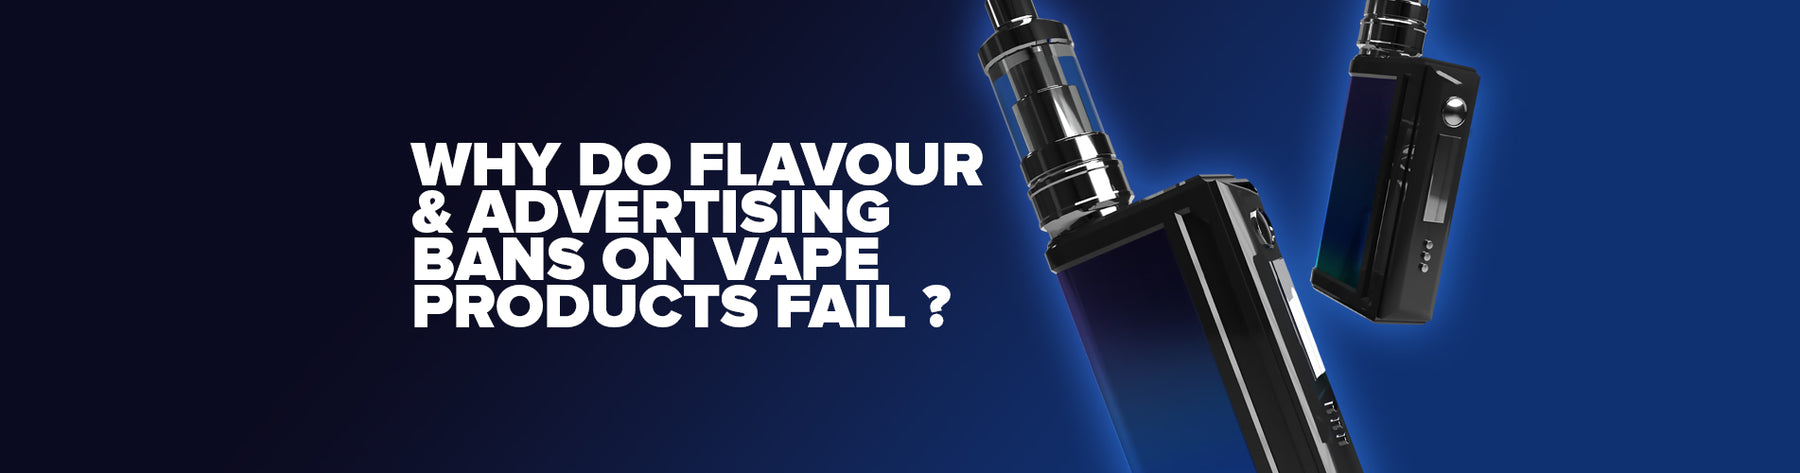 Why Do Flavor And Advertising Bans On Vape Products Fail?